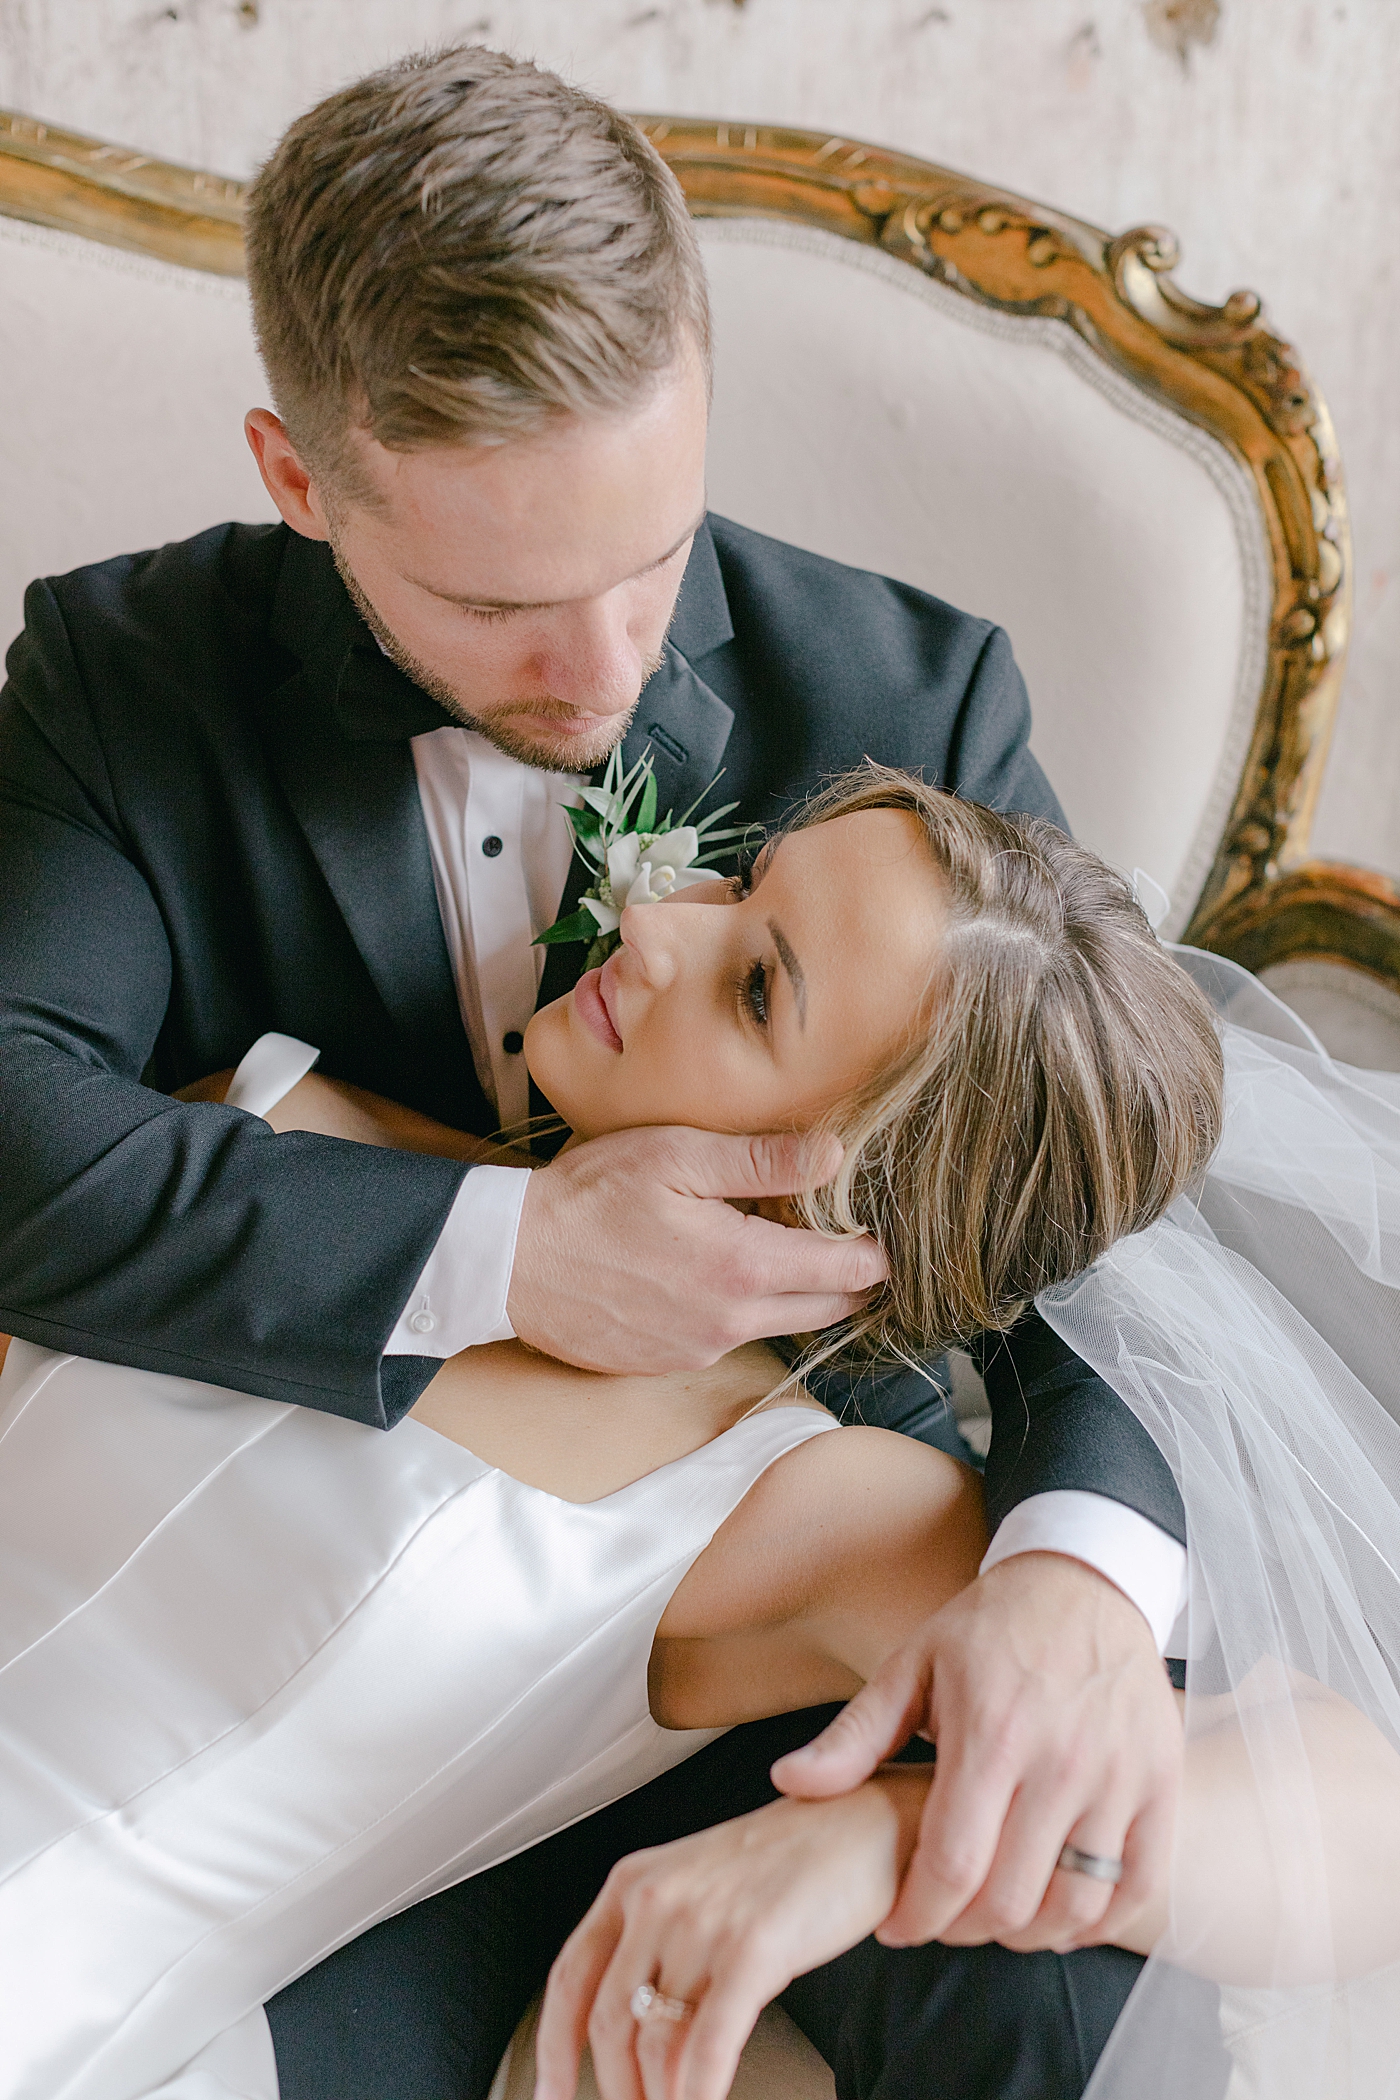 Groom holding brides face while they sit on a sofa | Excelsior PA Wedding Photography by Hope Helmuth Photography